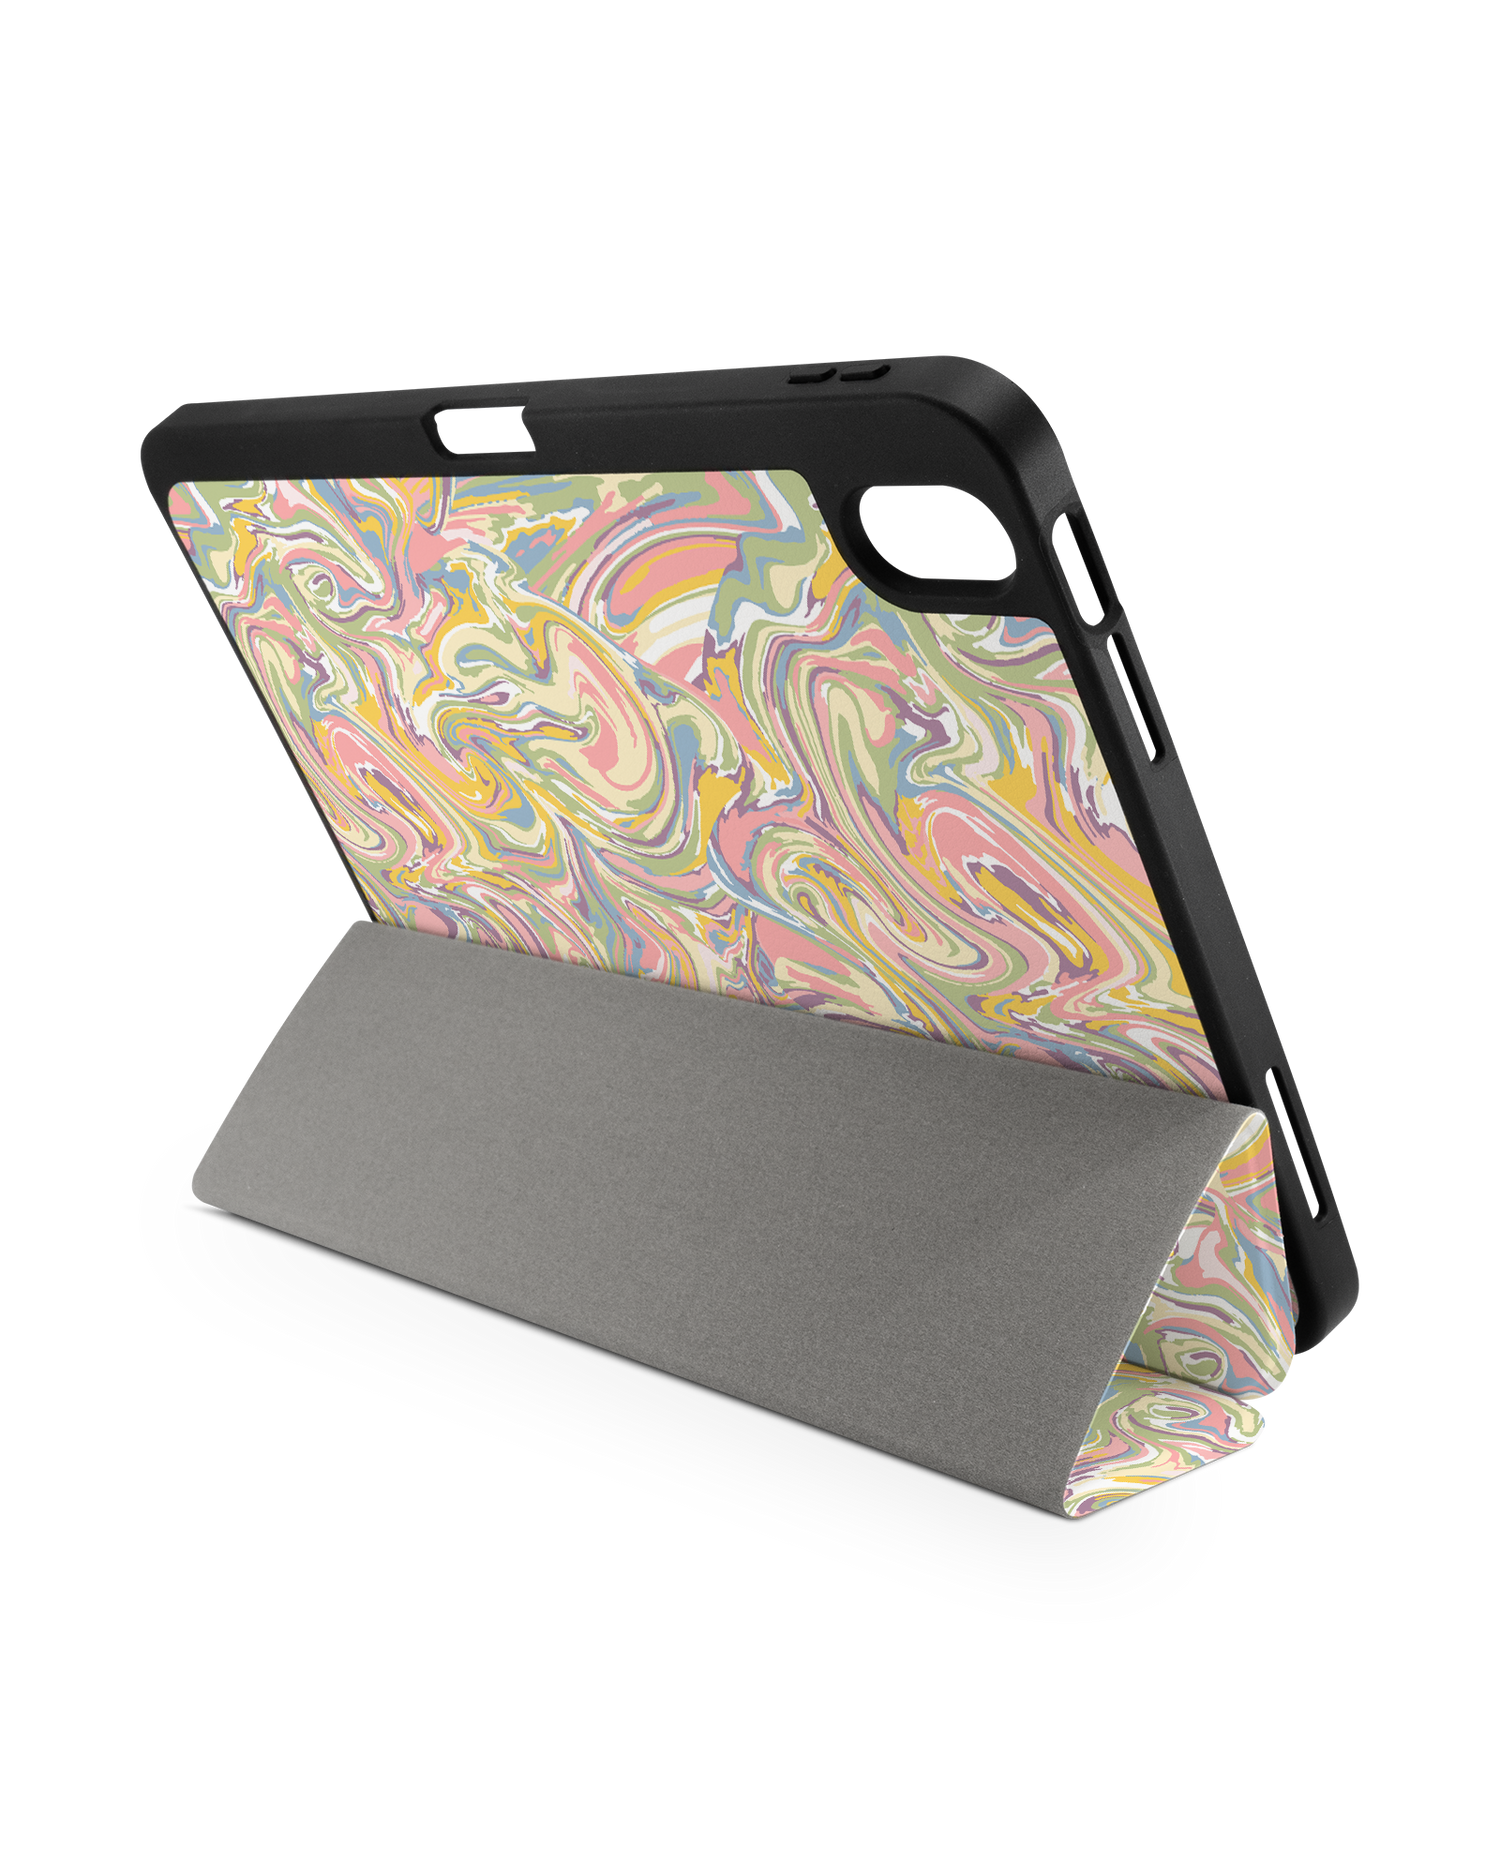 Psychedelic Optics iPad Case with Pencil Holder for Apple iPad (10th Generation): Set up in landscape format (back view)